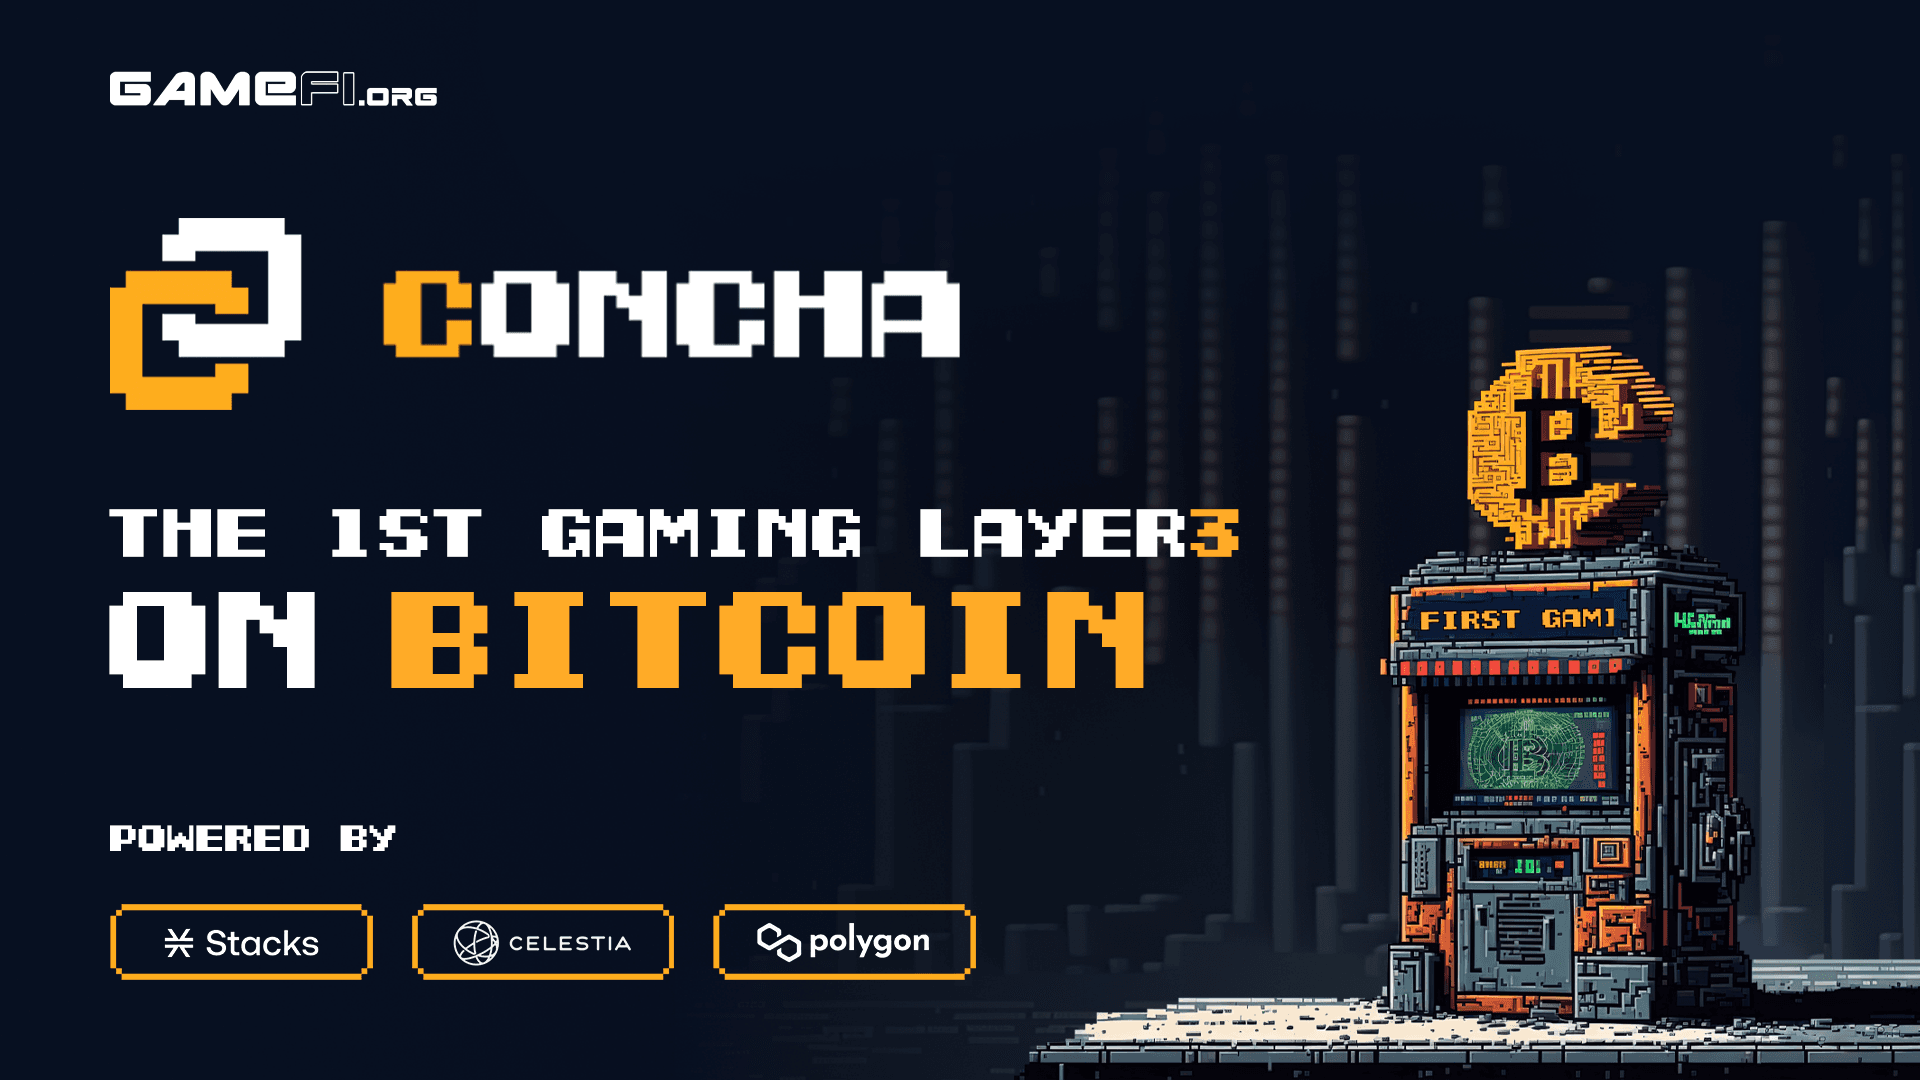 CONLA of GAFI 2.0: Builds The First Gaming L3 on Bitcoin - Powered by Rootstock, Celestia, and Polygon.